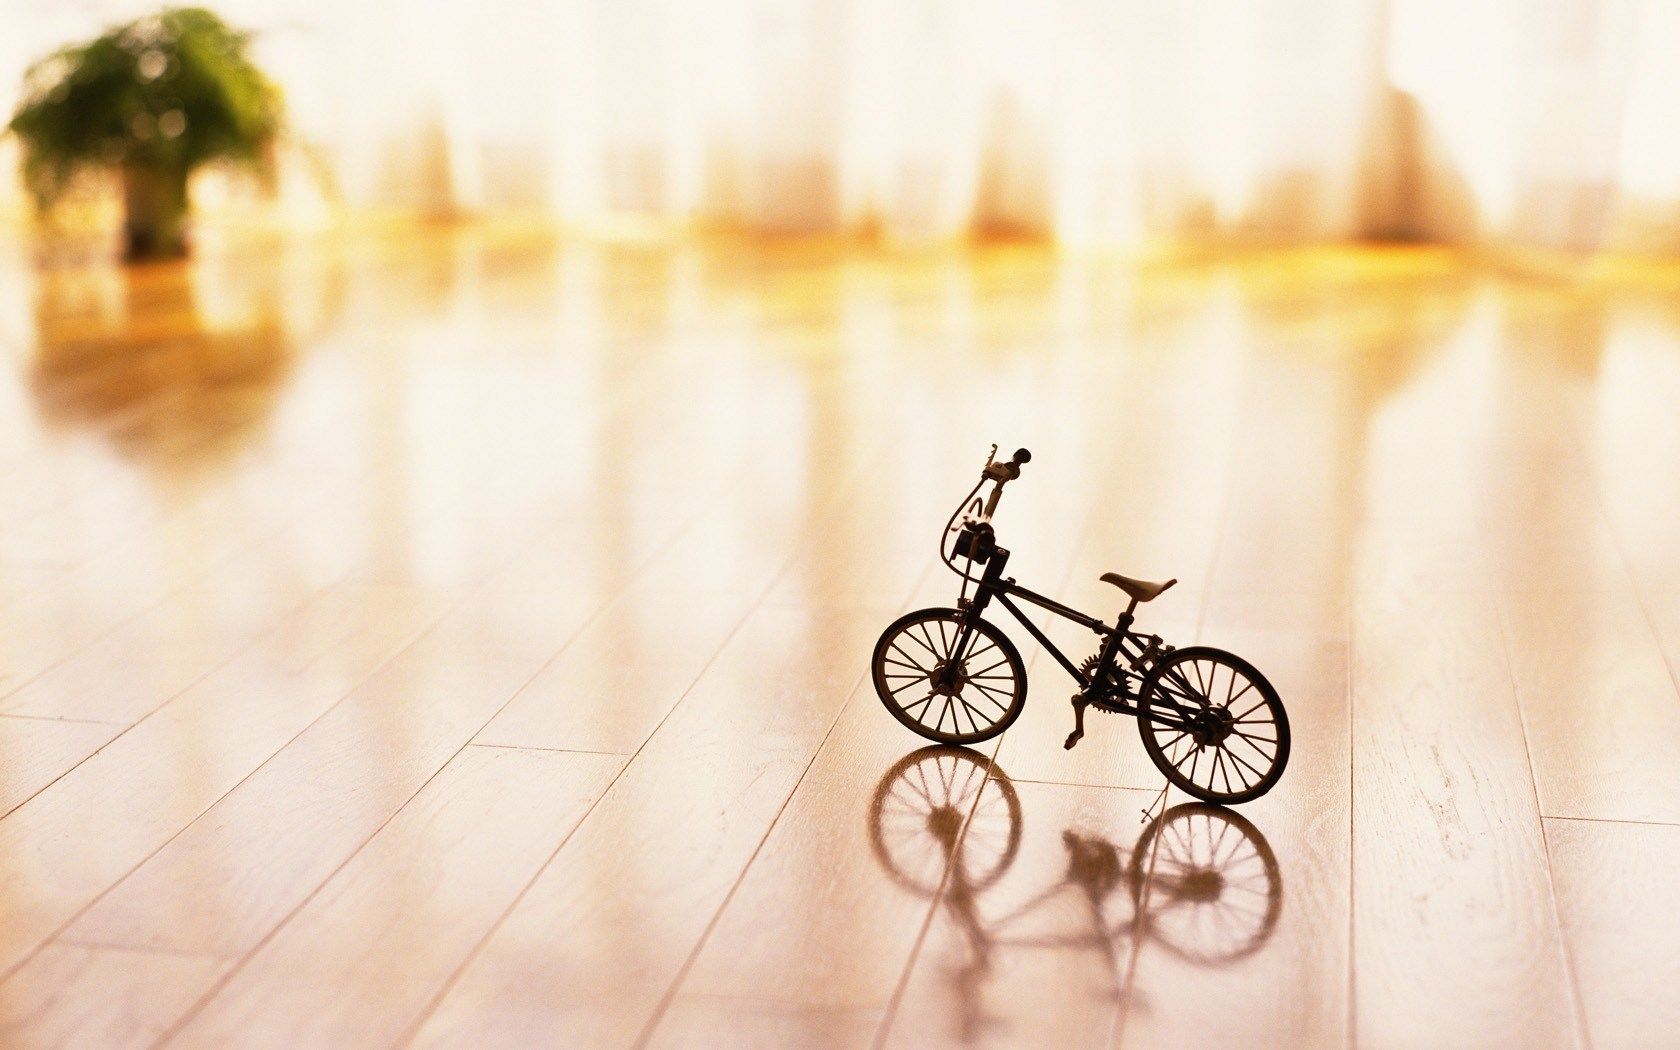 HD wallpaper, Toy, Bicycle, Mood